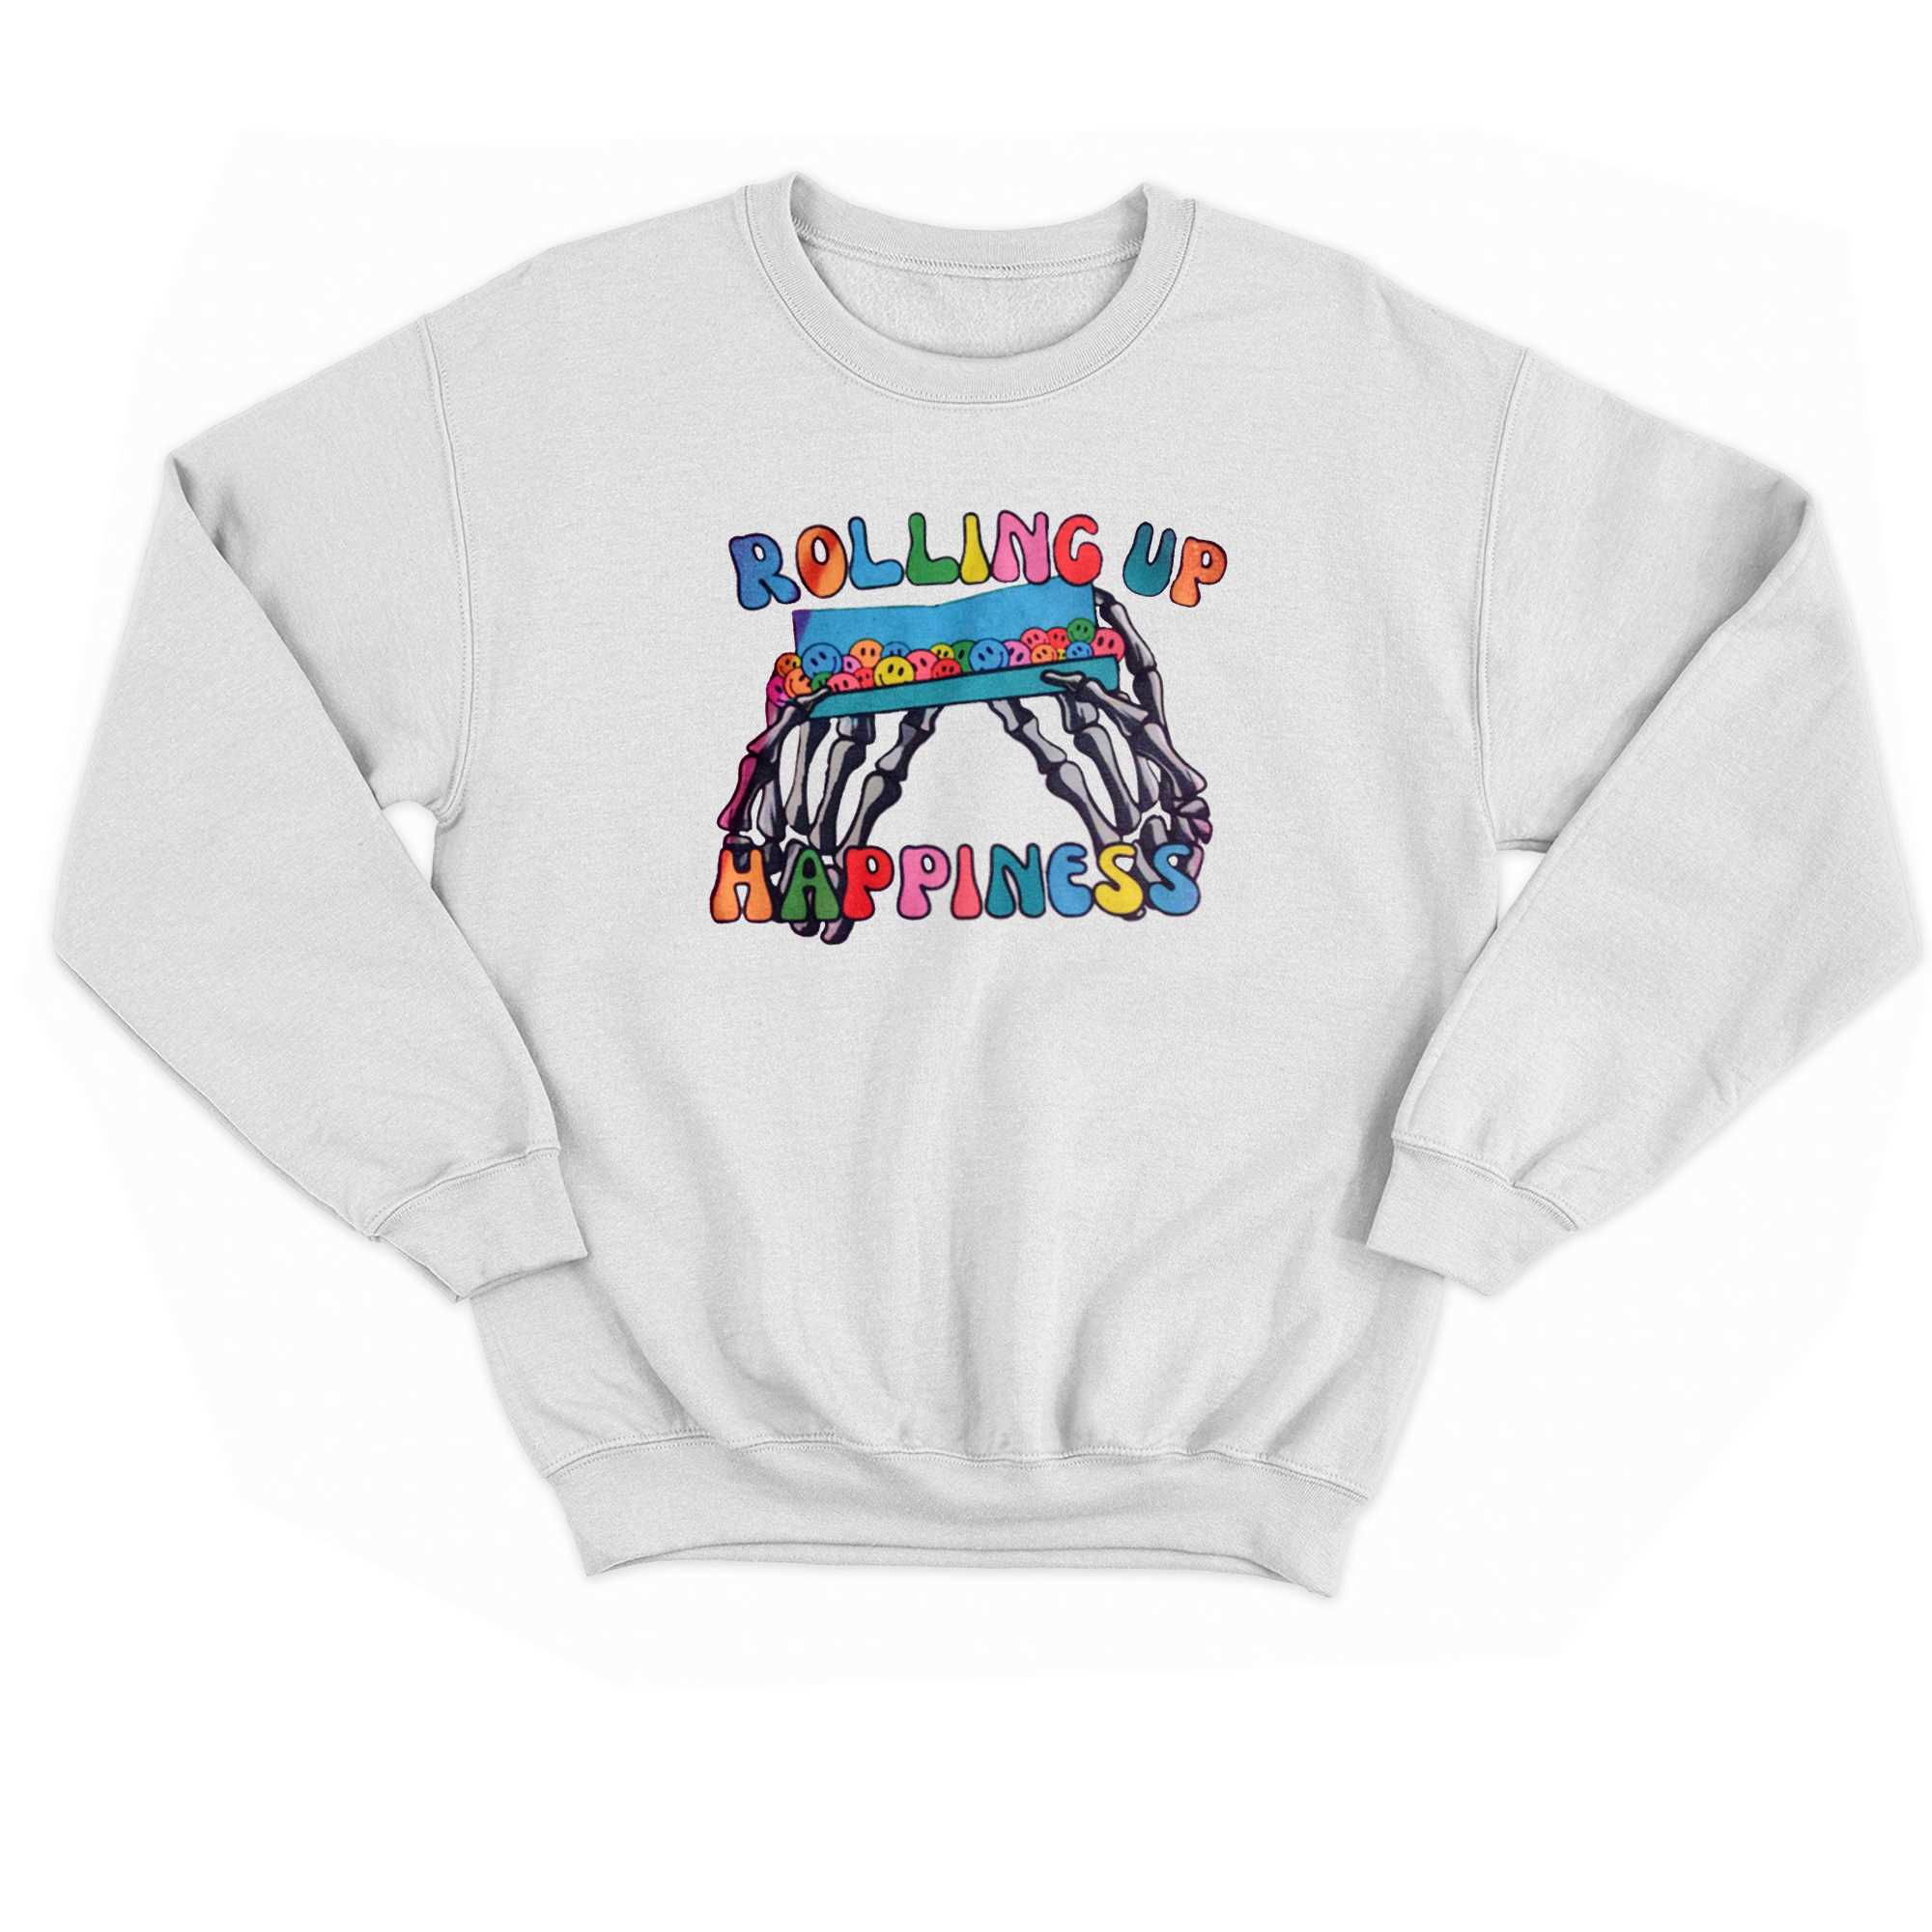 Rolling Up Happiness T-shirt 